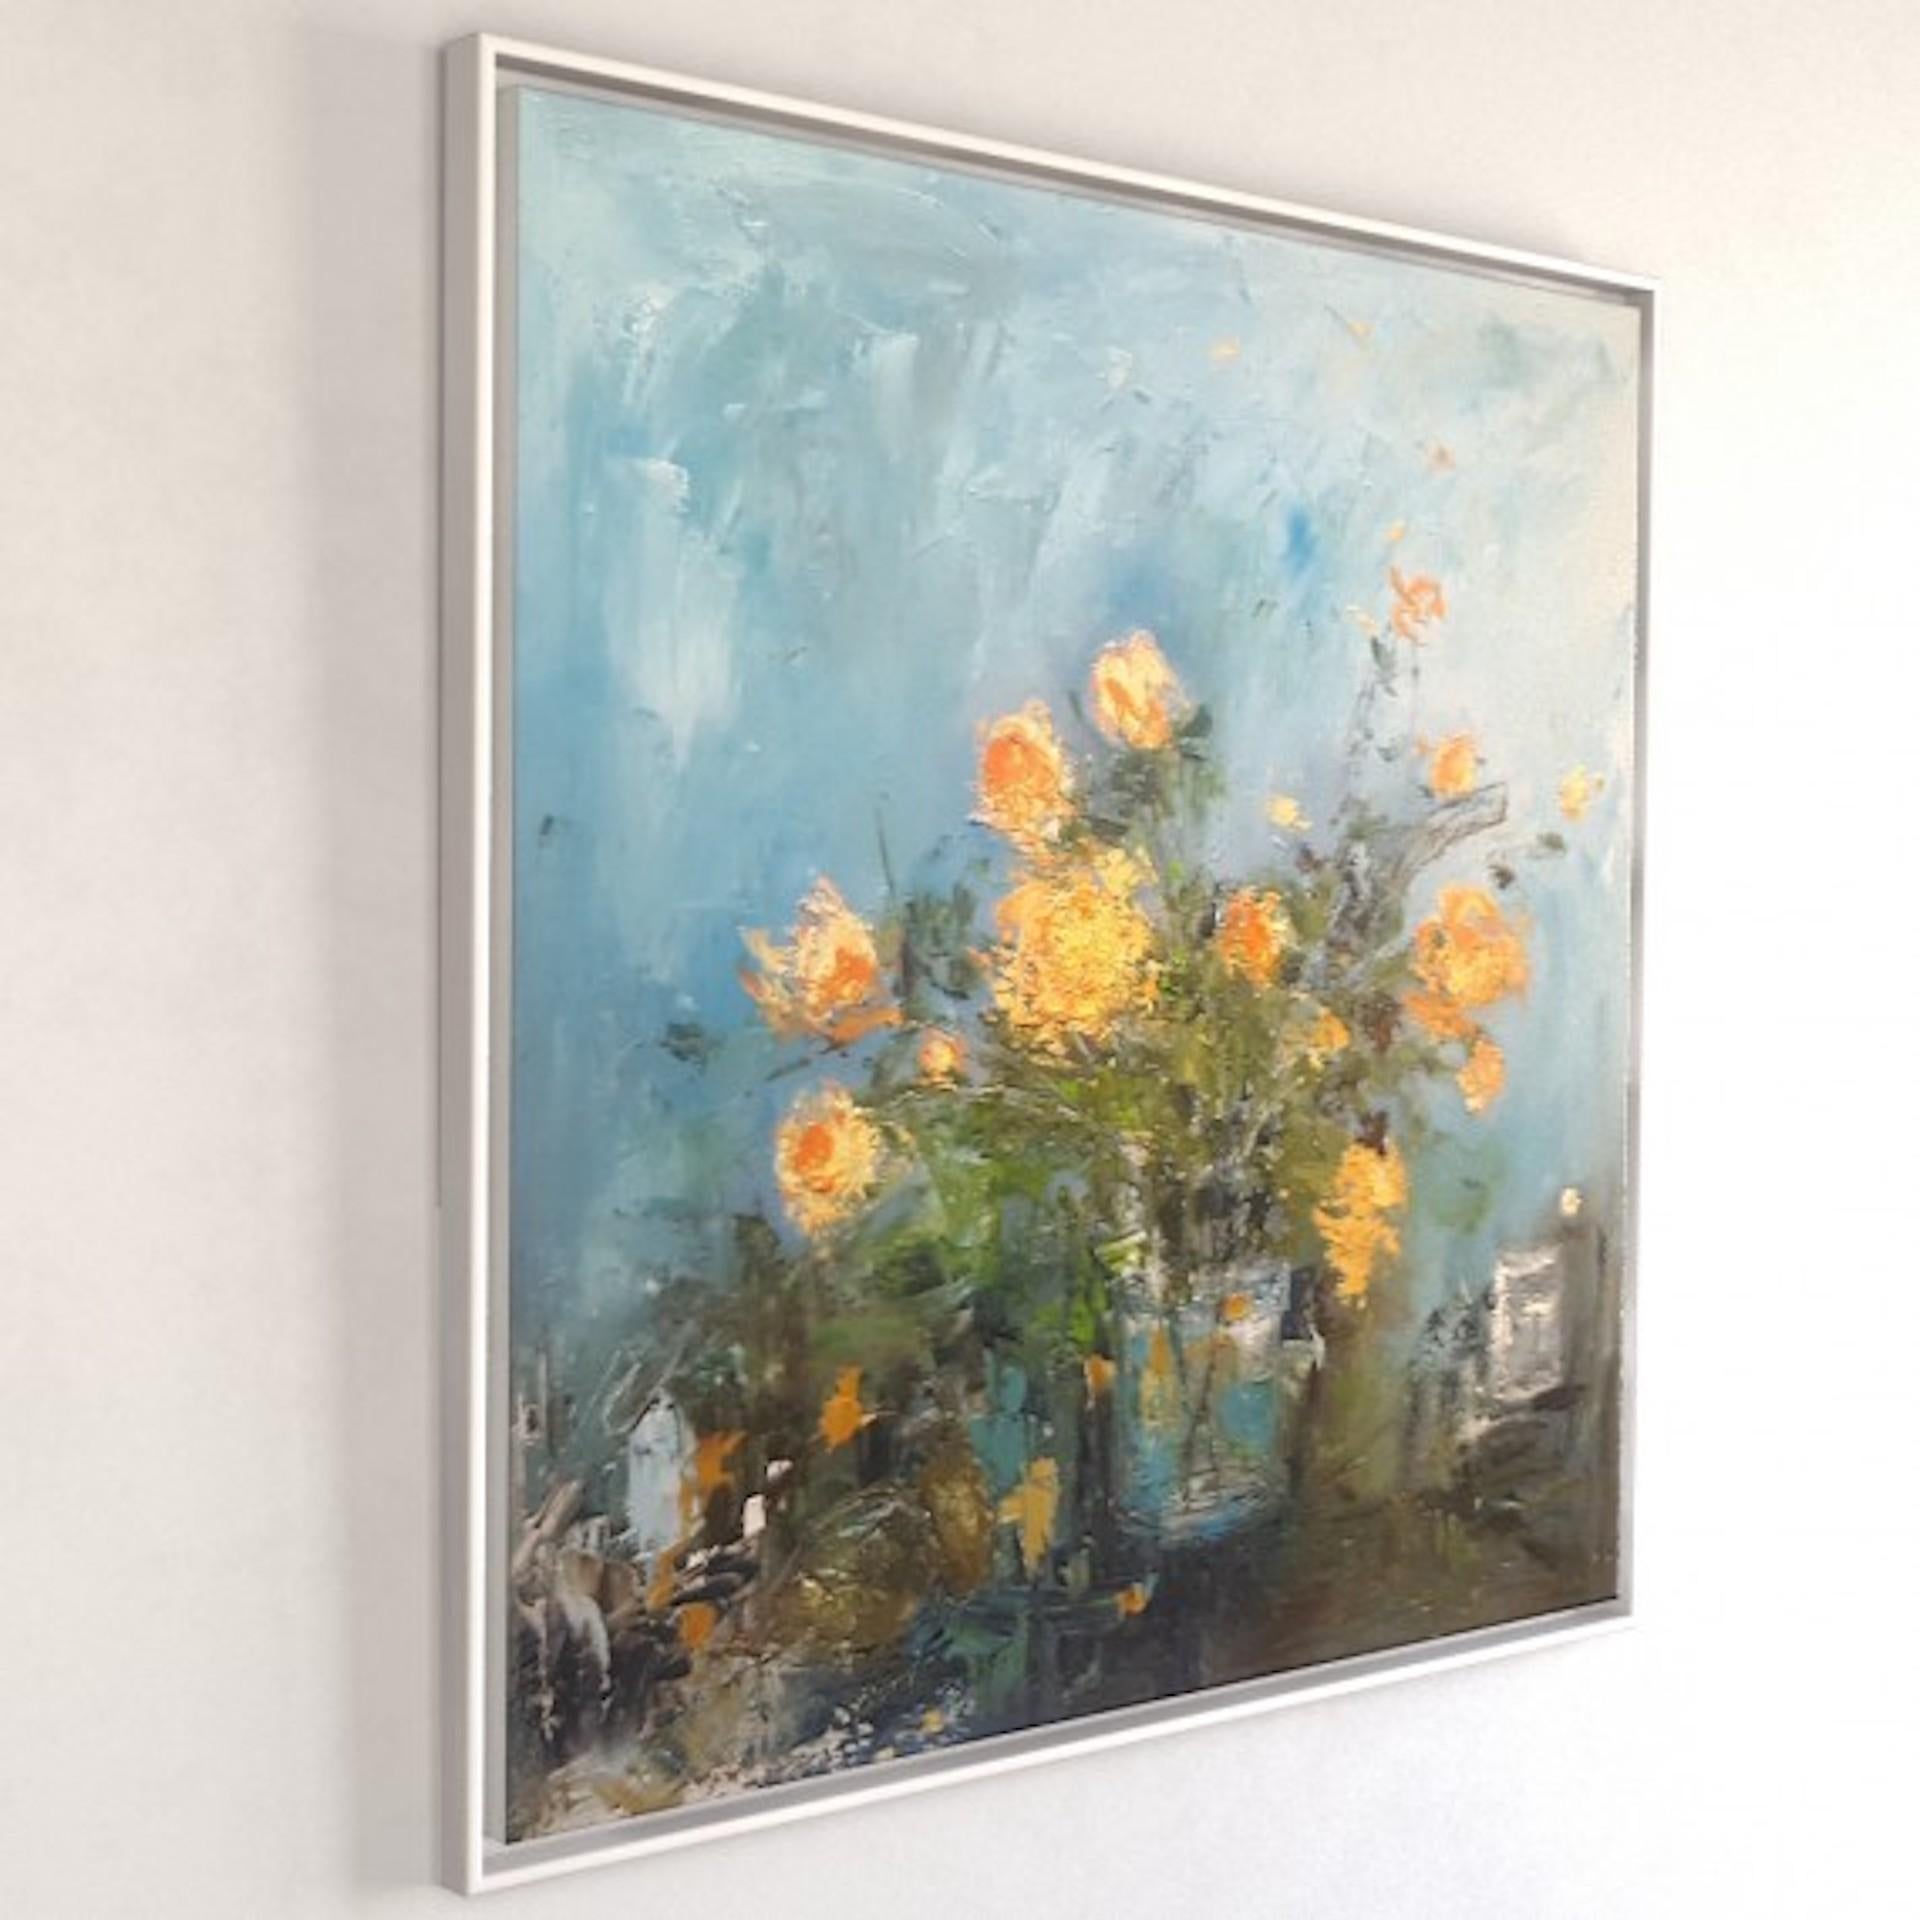 Best in Show-Daisy [2020]
Original
Flowers
Oil Paint on Canvas
Complete Size of Unframed Work: H:80 cm x W:80 cm x D:2.5cm
Framed Size: H:84 cm x W:84 cm x D:3cm
Sold Framed
Please note that insitu images are purely an indication of how a piece may